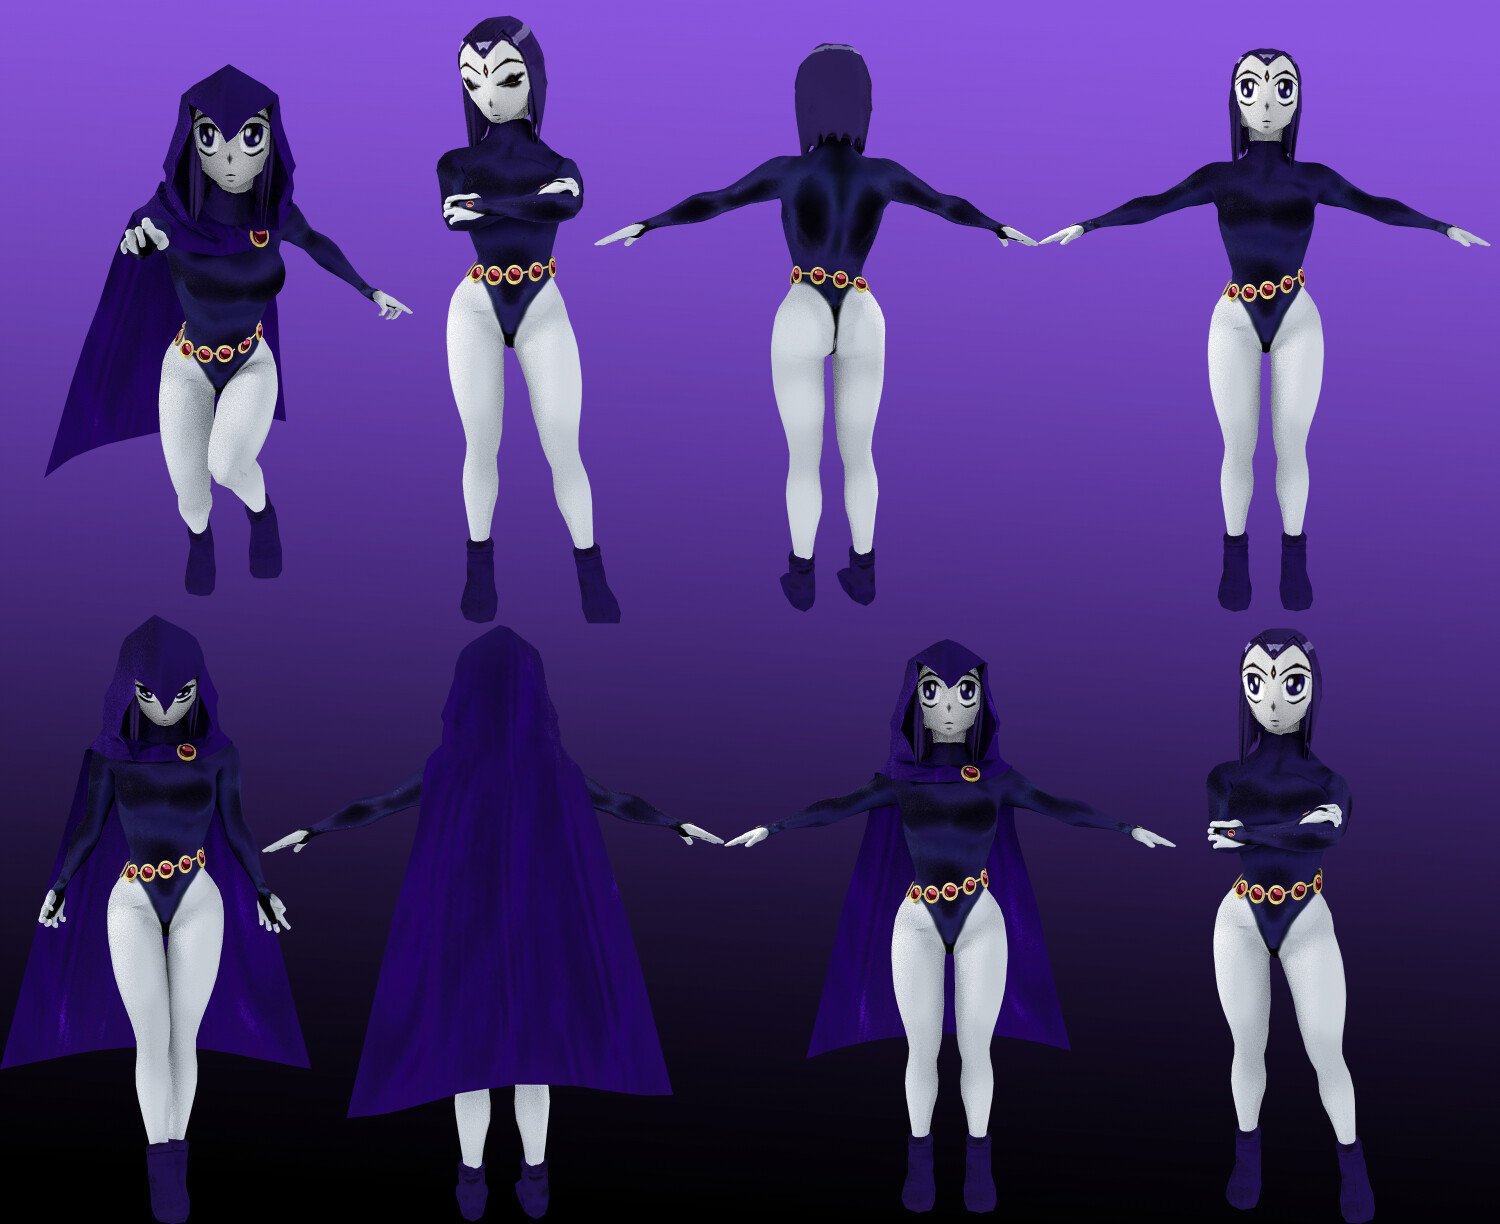 charles pulley recommends pics of raven from teen titans pic